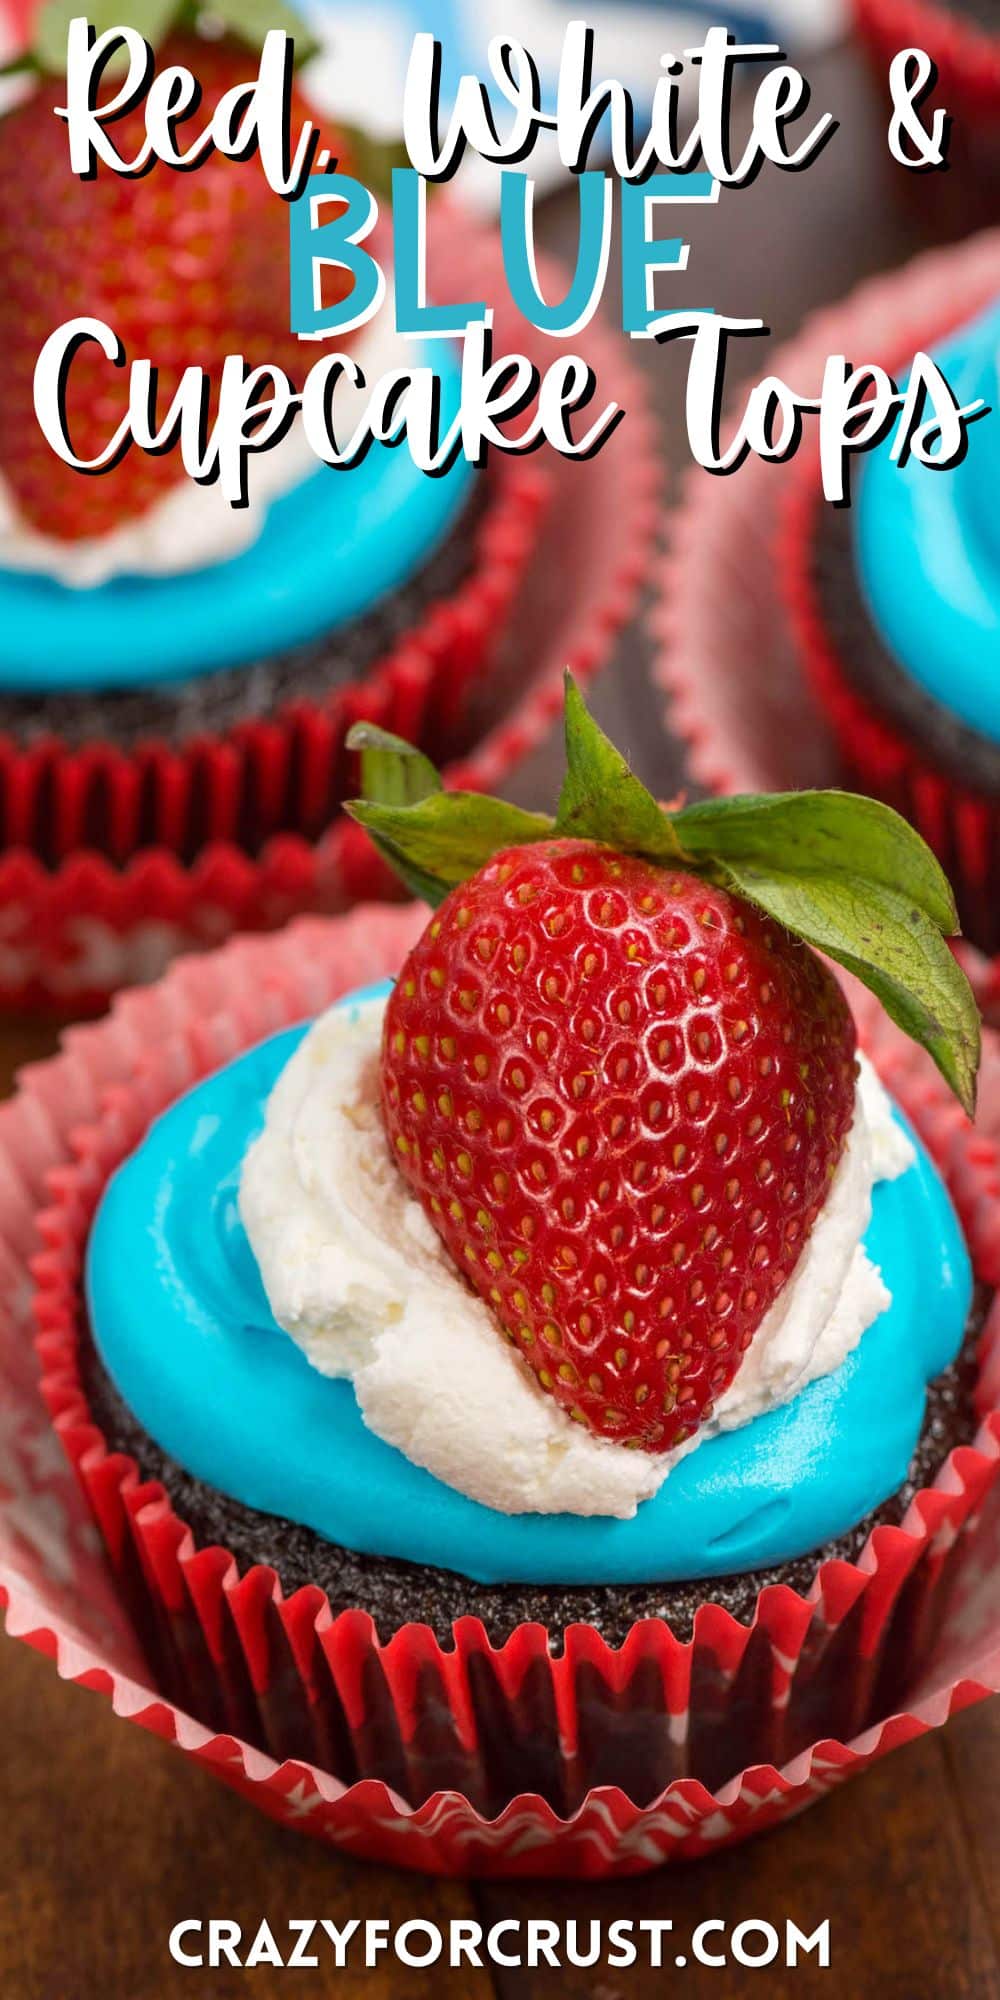 cupcakes with red white and blue frosting and a strawberry on top with words on the image.